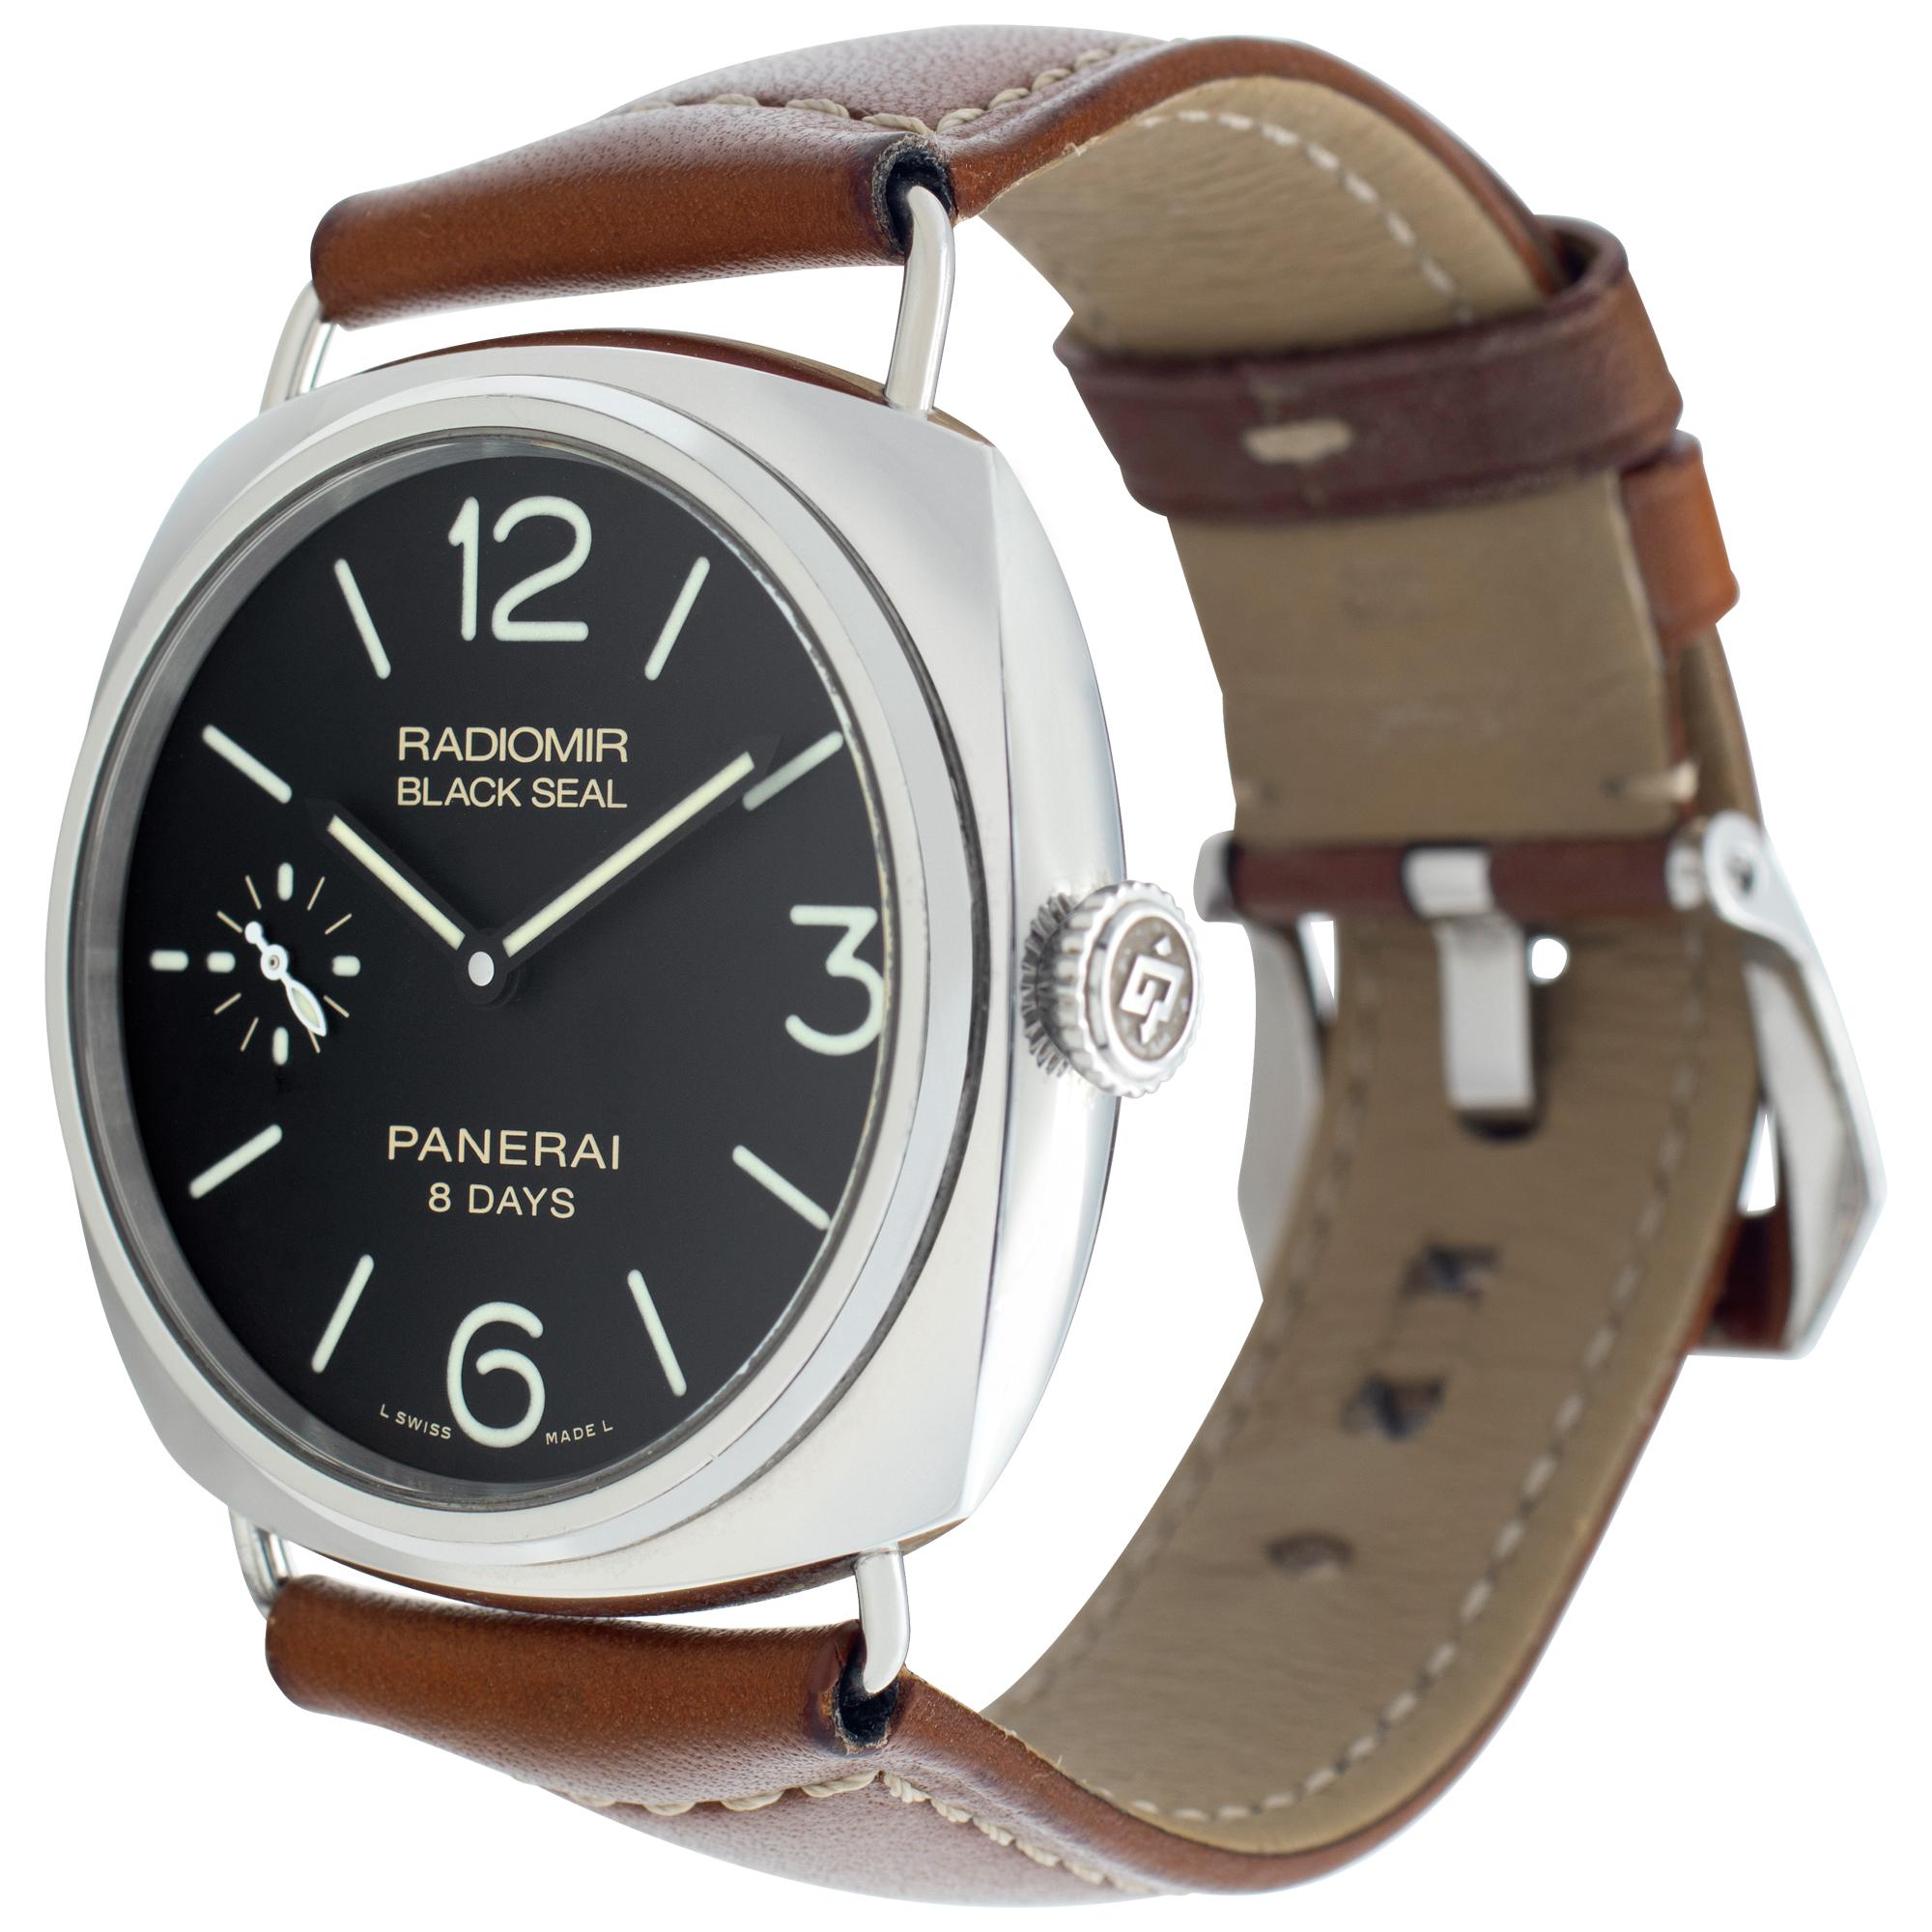 Panerai Radiomir Firenze in stainless steel on leather strap. Auto w/ subseconds. 44 mm case size. With box and papers. Ref PAM00609. Circa 2018. Fine Pre-owned Panerai Watch. Certified preowned Sport Panerai Radiomir Firenze PAM00609 watch is made